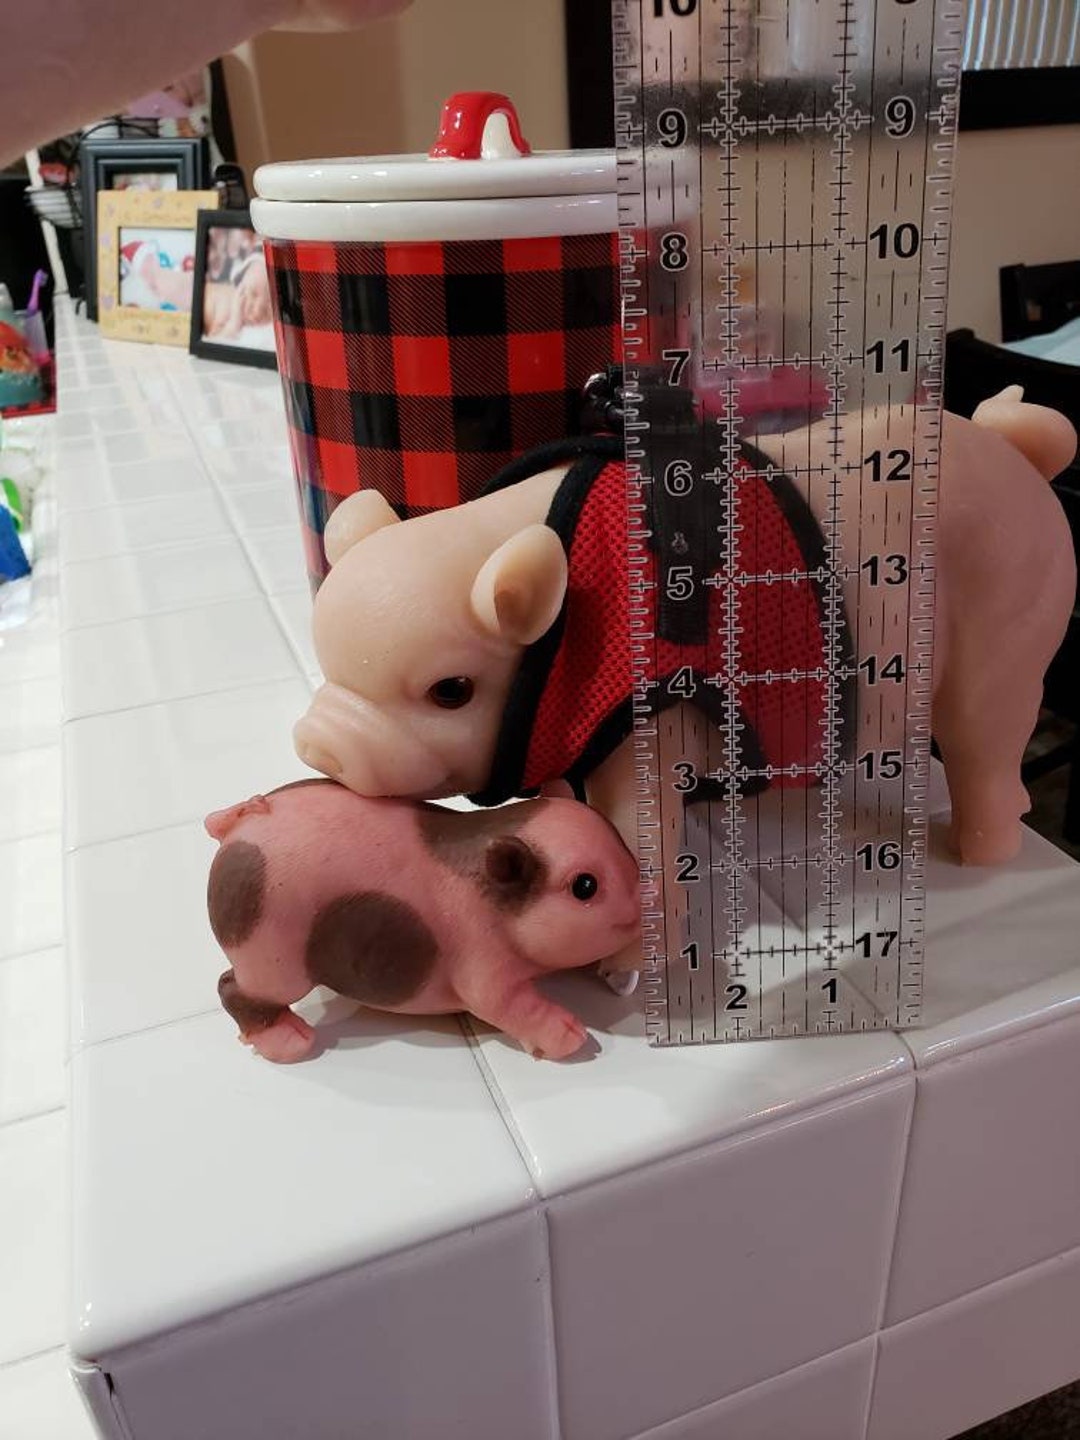 Silicone Pig Doll Toy  Cute Lifelike, Realistic Micro Piggy for